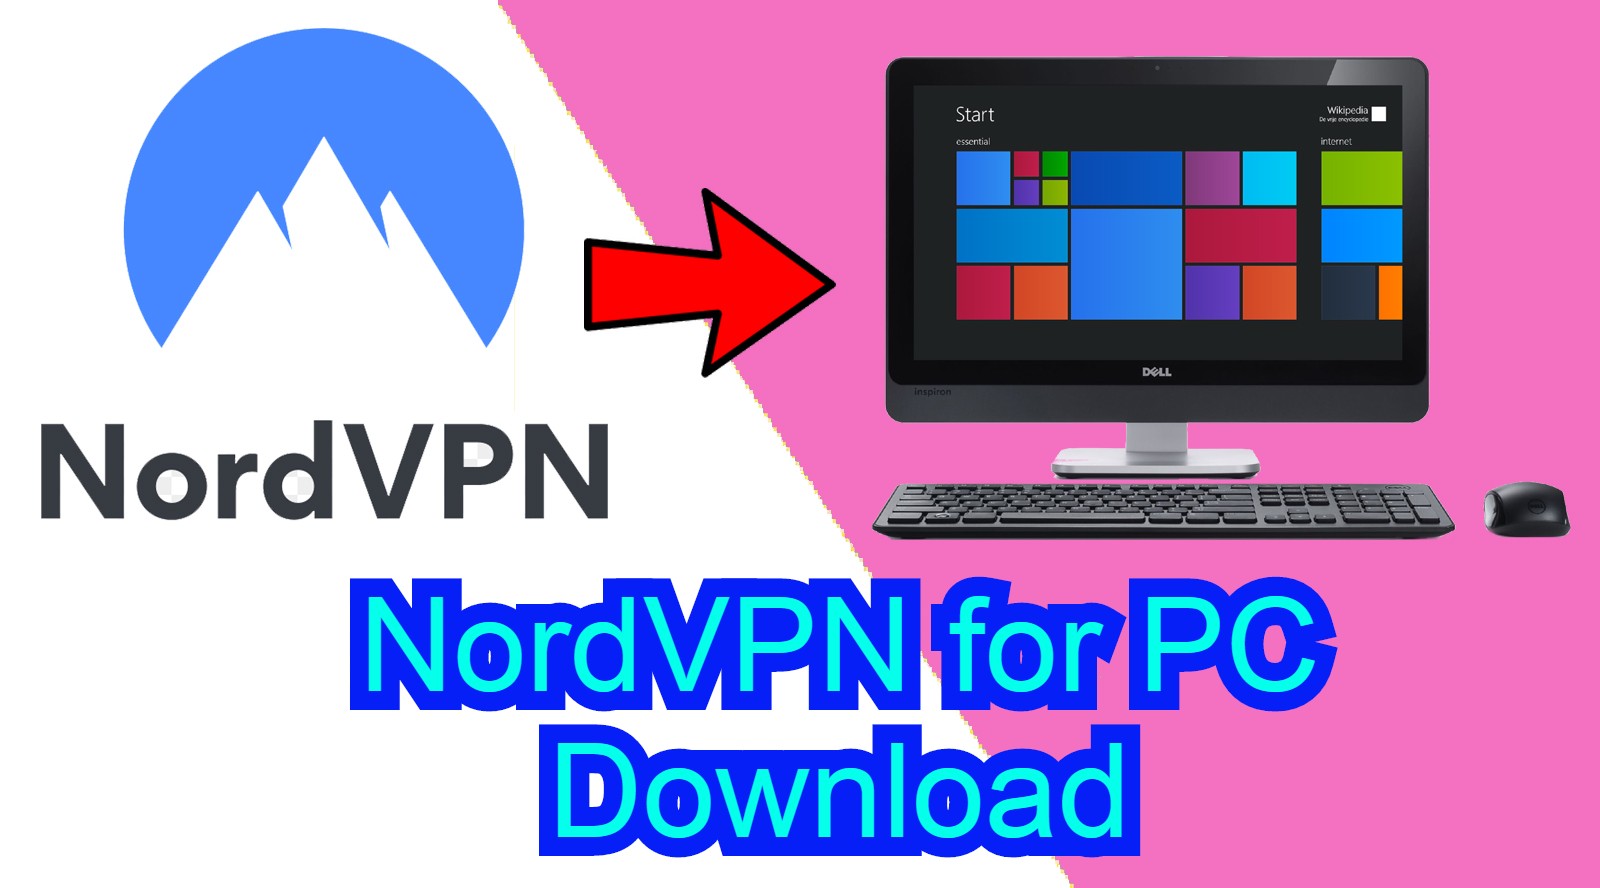 nordvpn free download for pc